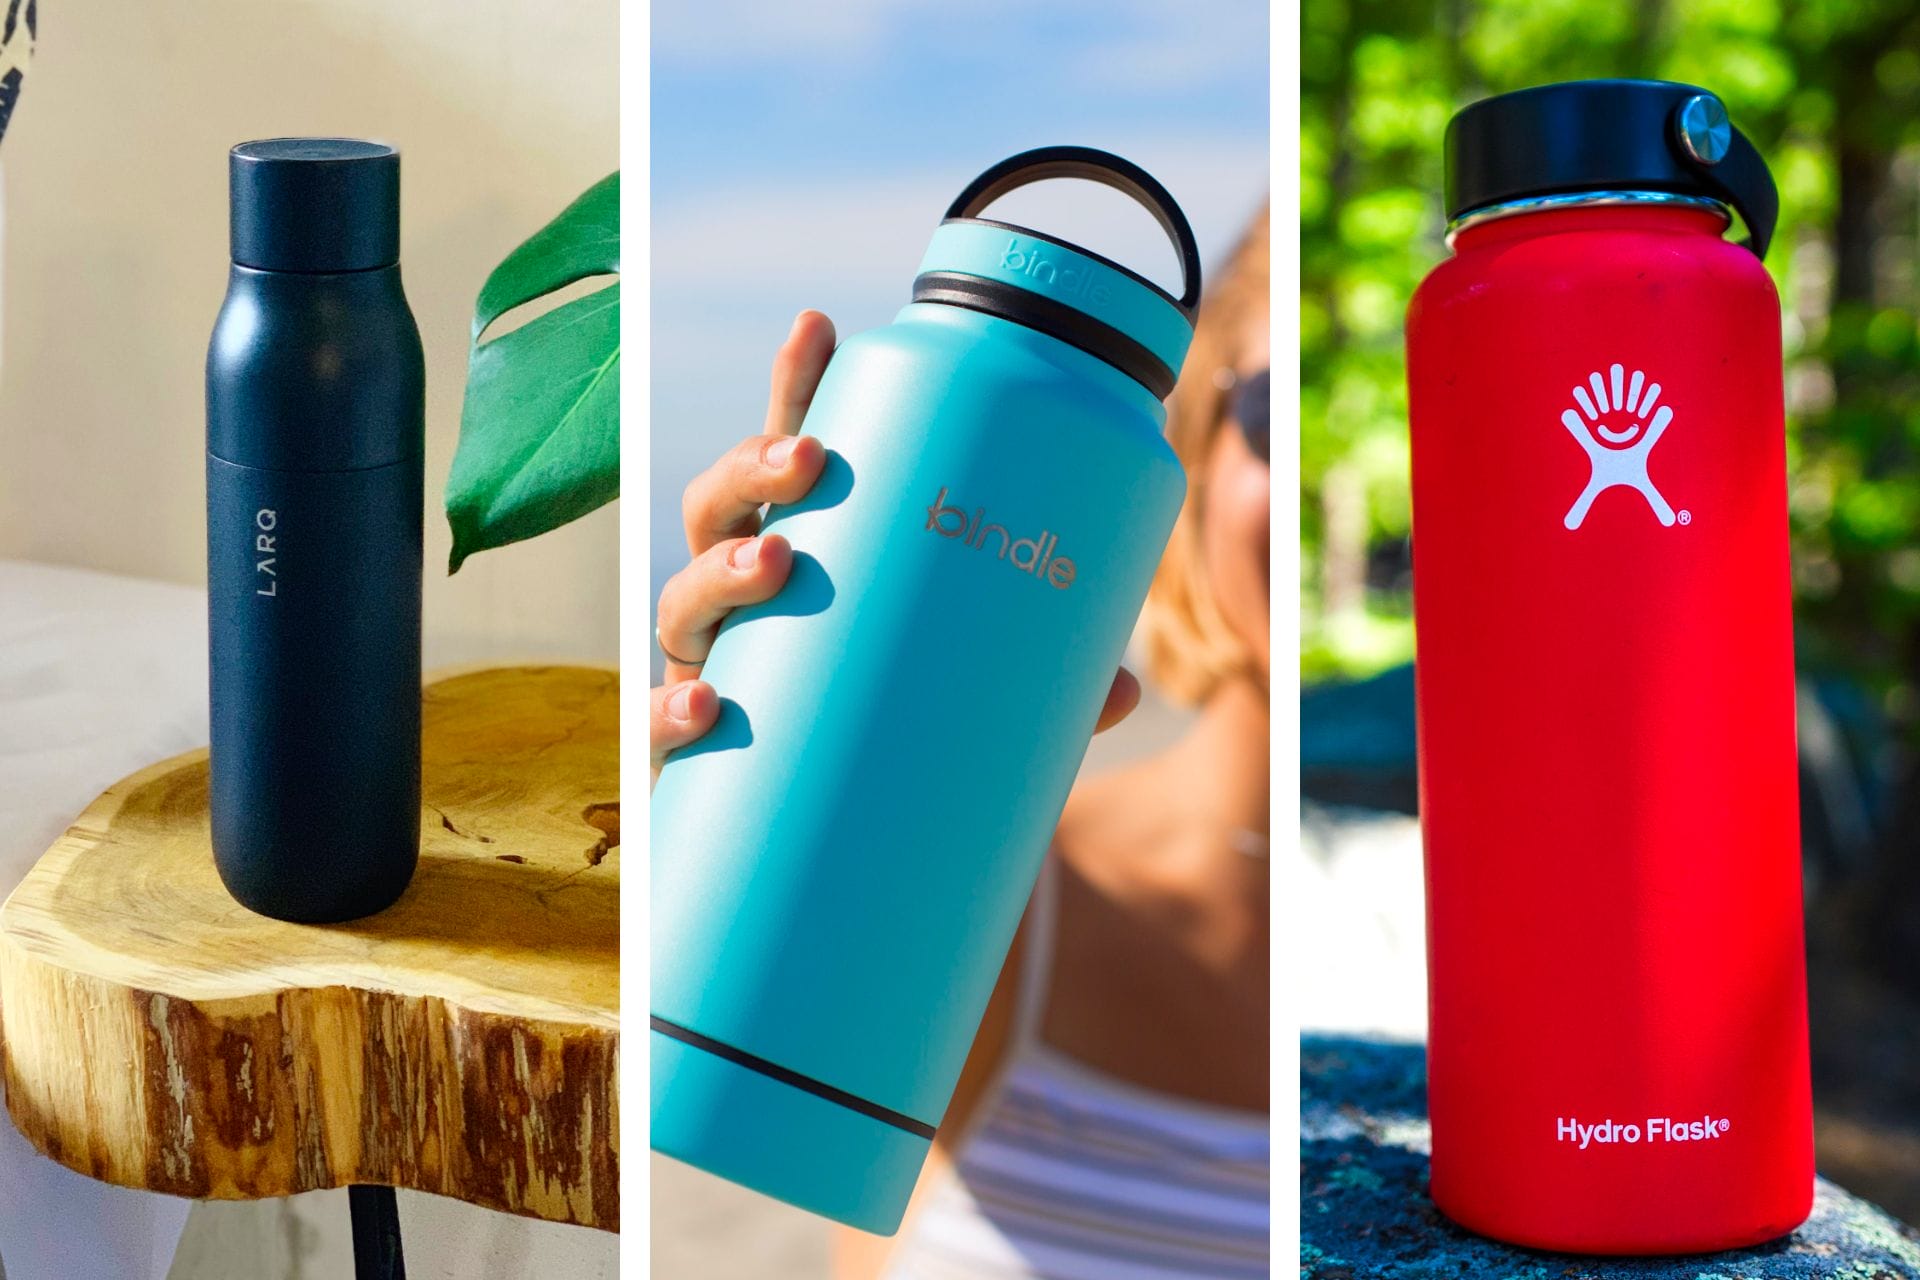 Everyone Is Bringing These Water Bottles to Disney World…and You